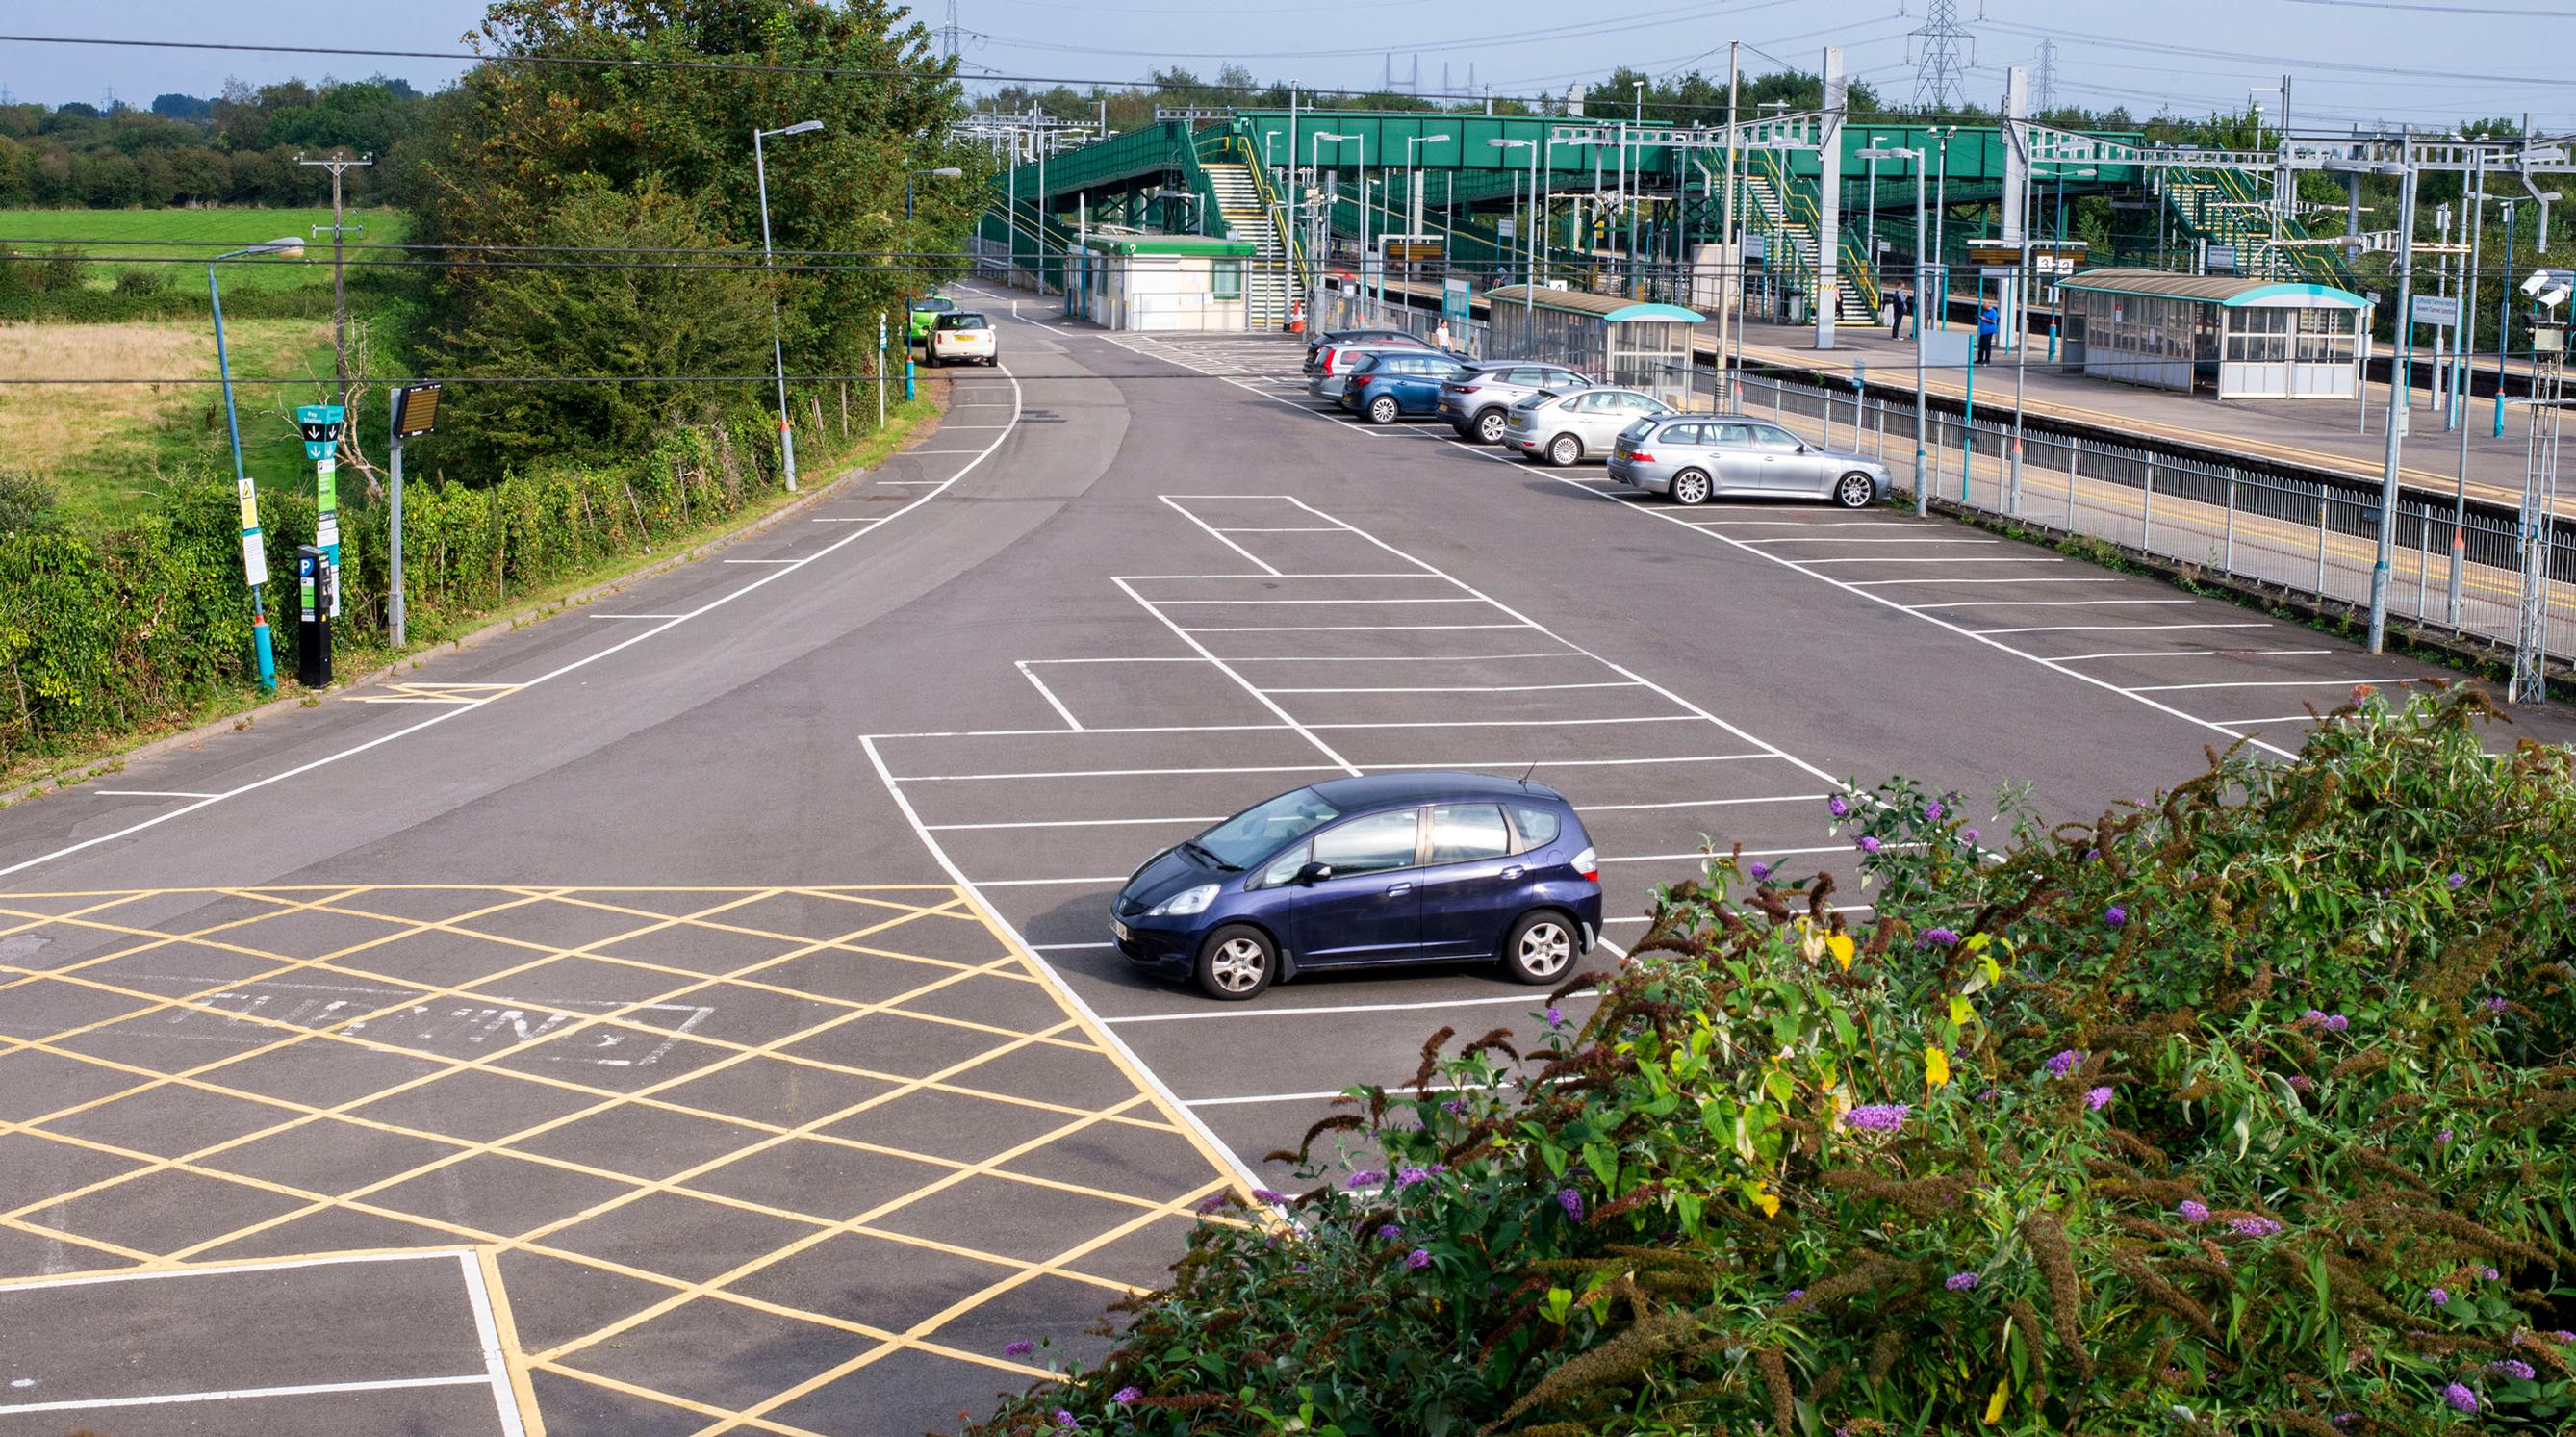 A Monday afternoon at the Severn Tunnel Junction station car park